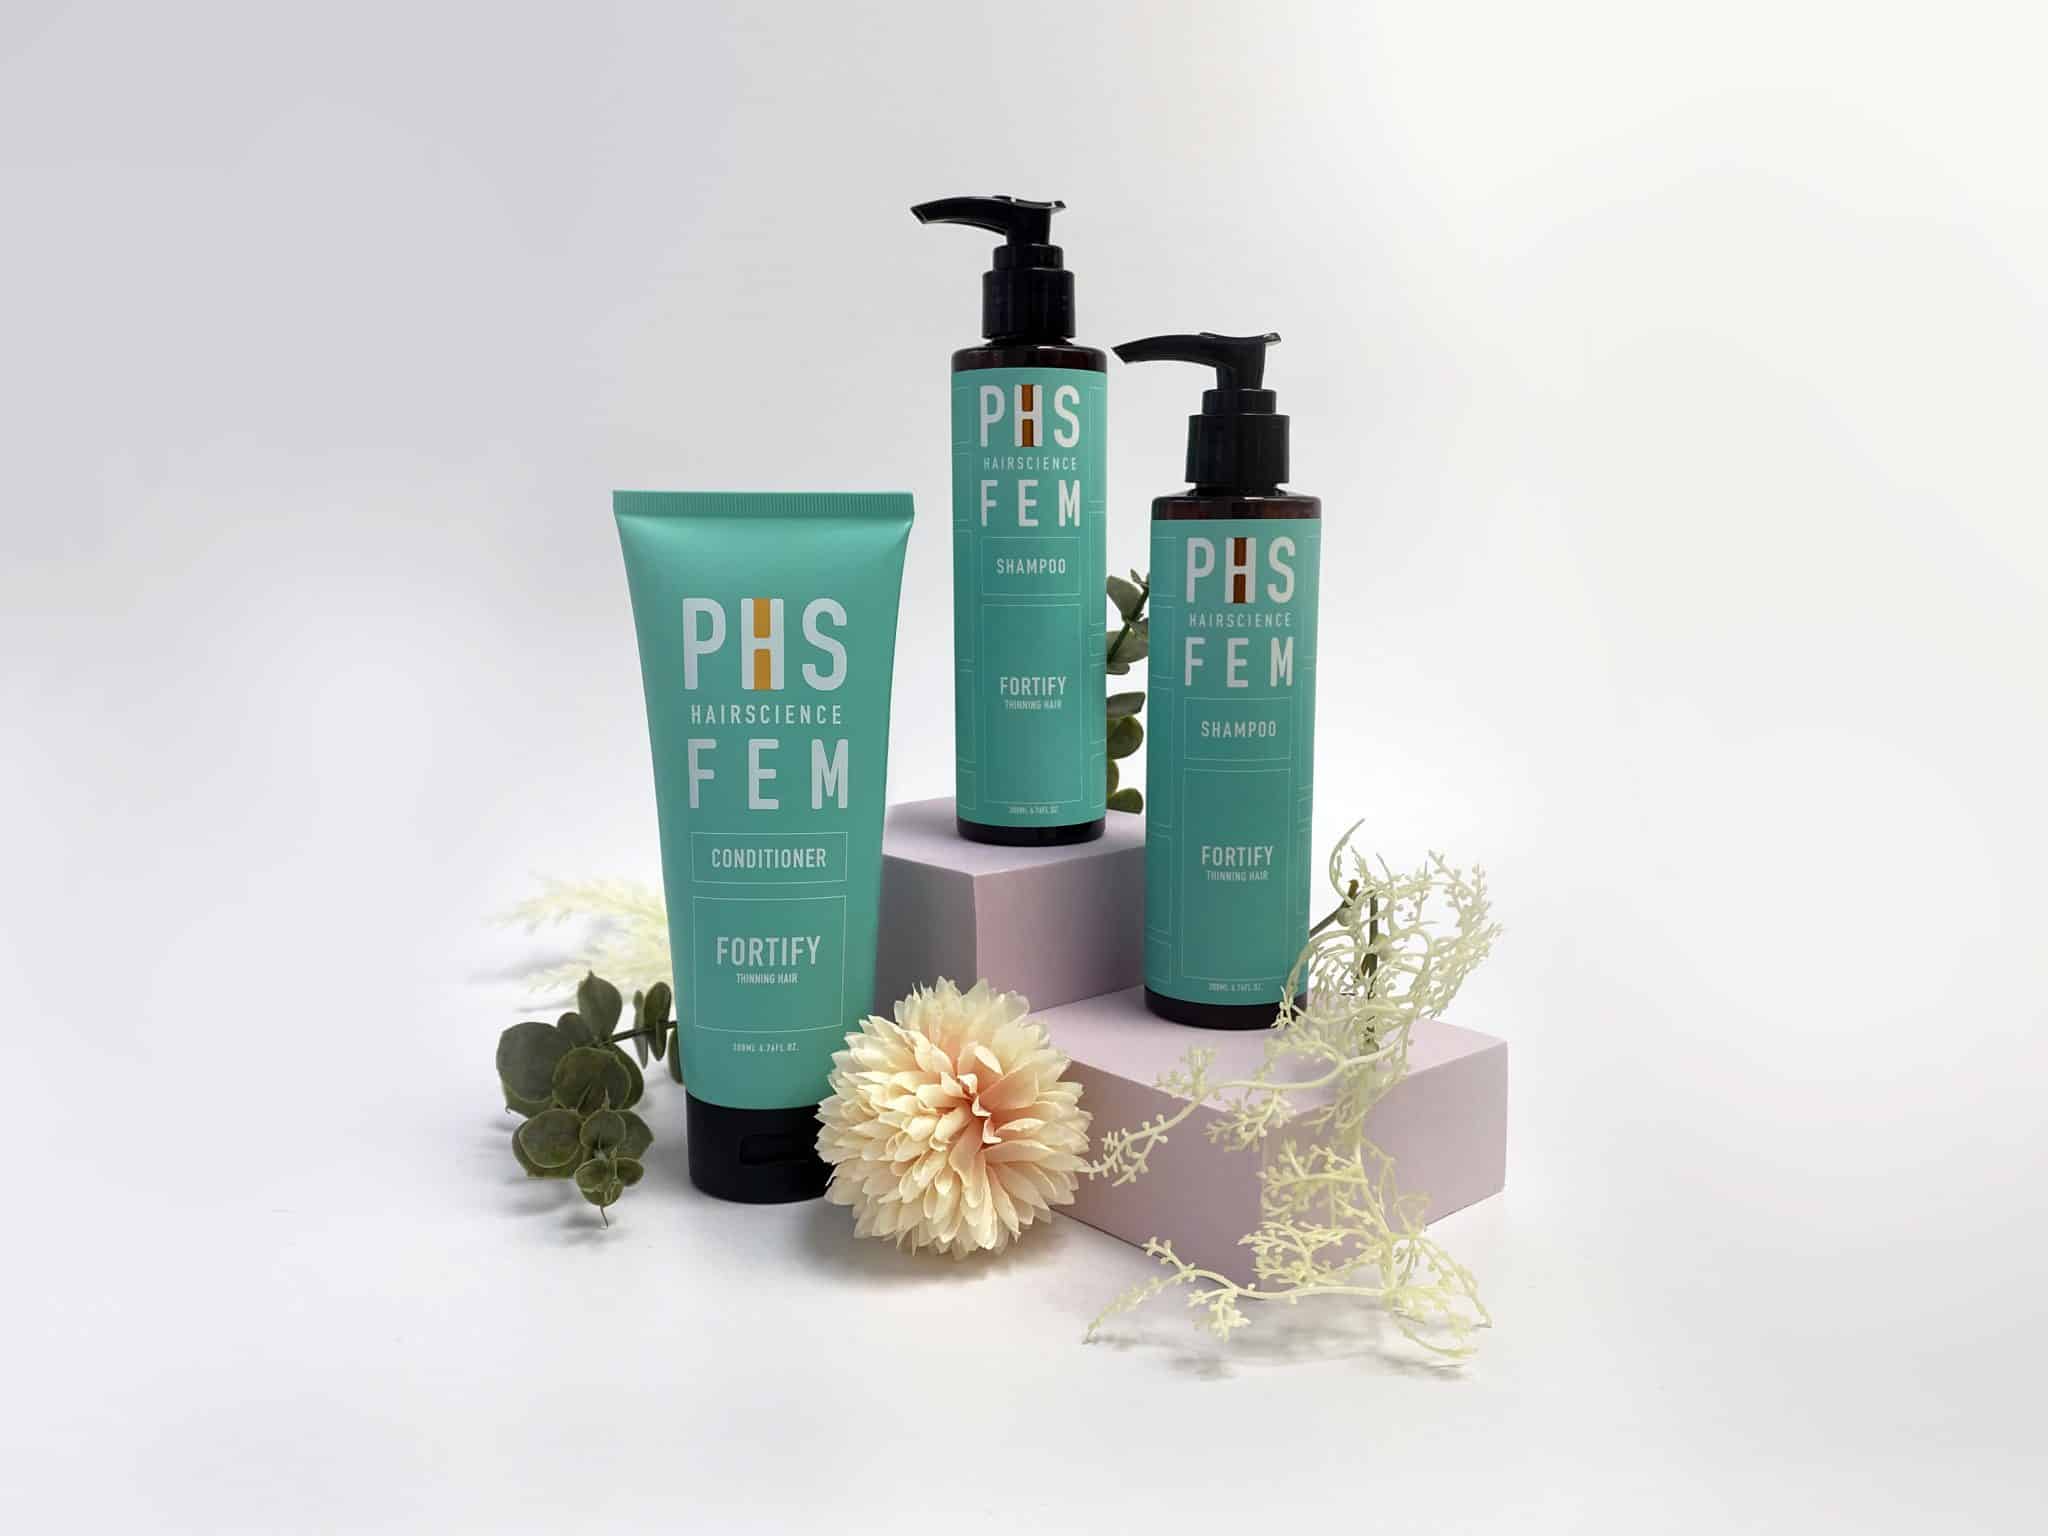 PHS HAIRSCIENCE products for hair loss